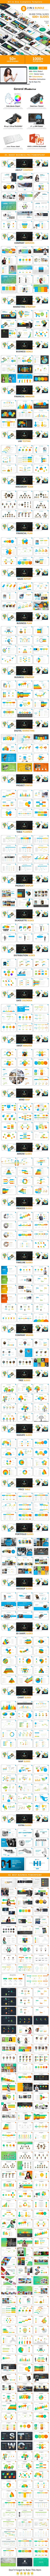 GraphicRiver 2 in 1 Complete Bundle Powerpoint 21108220